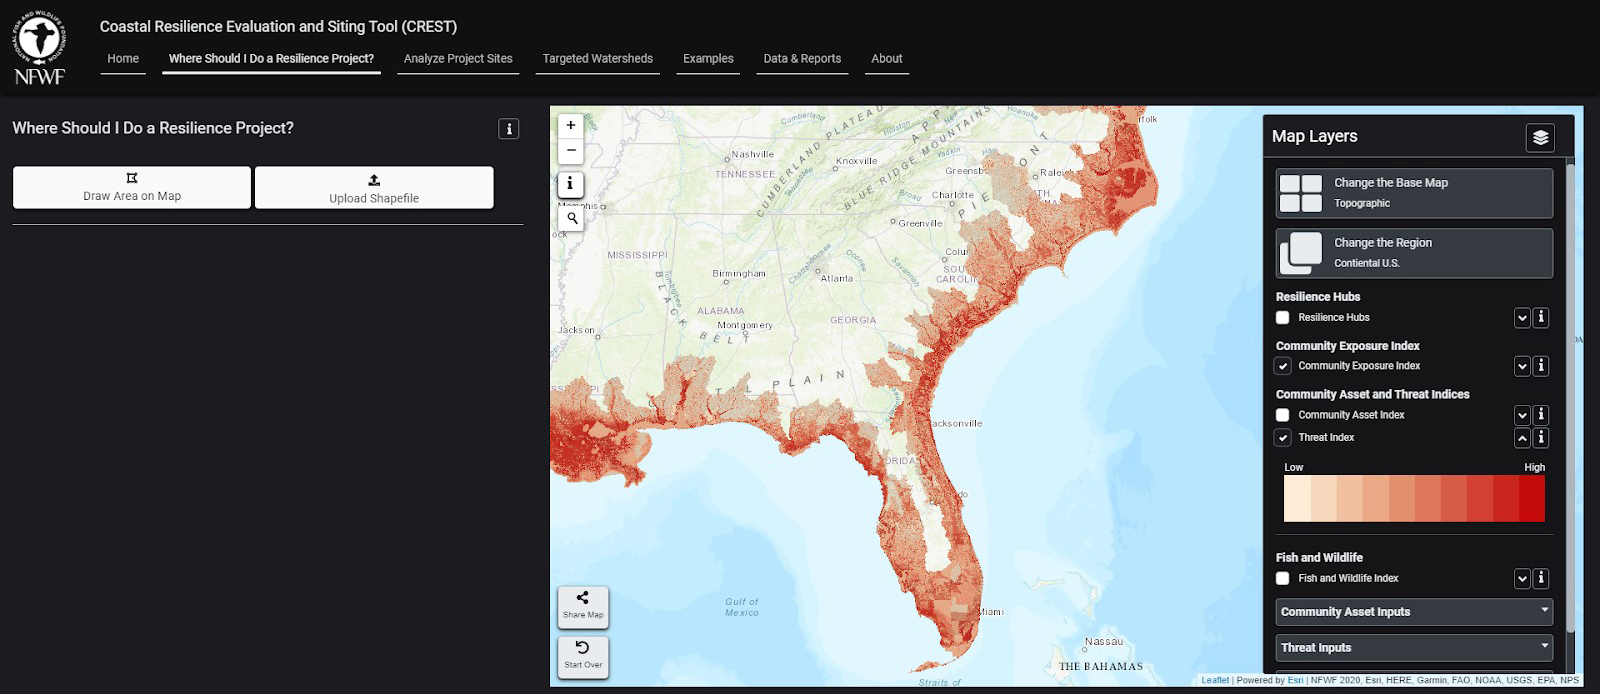 A screenshot of the tool, Coastal Resilience Evaluation and Siting Tool, being used.